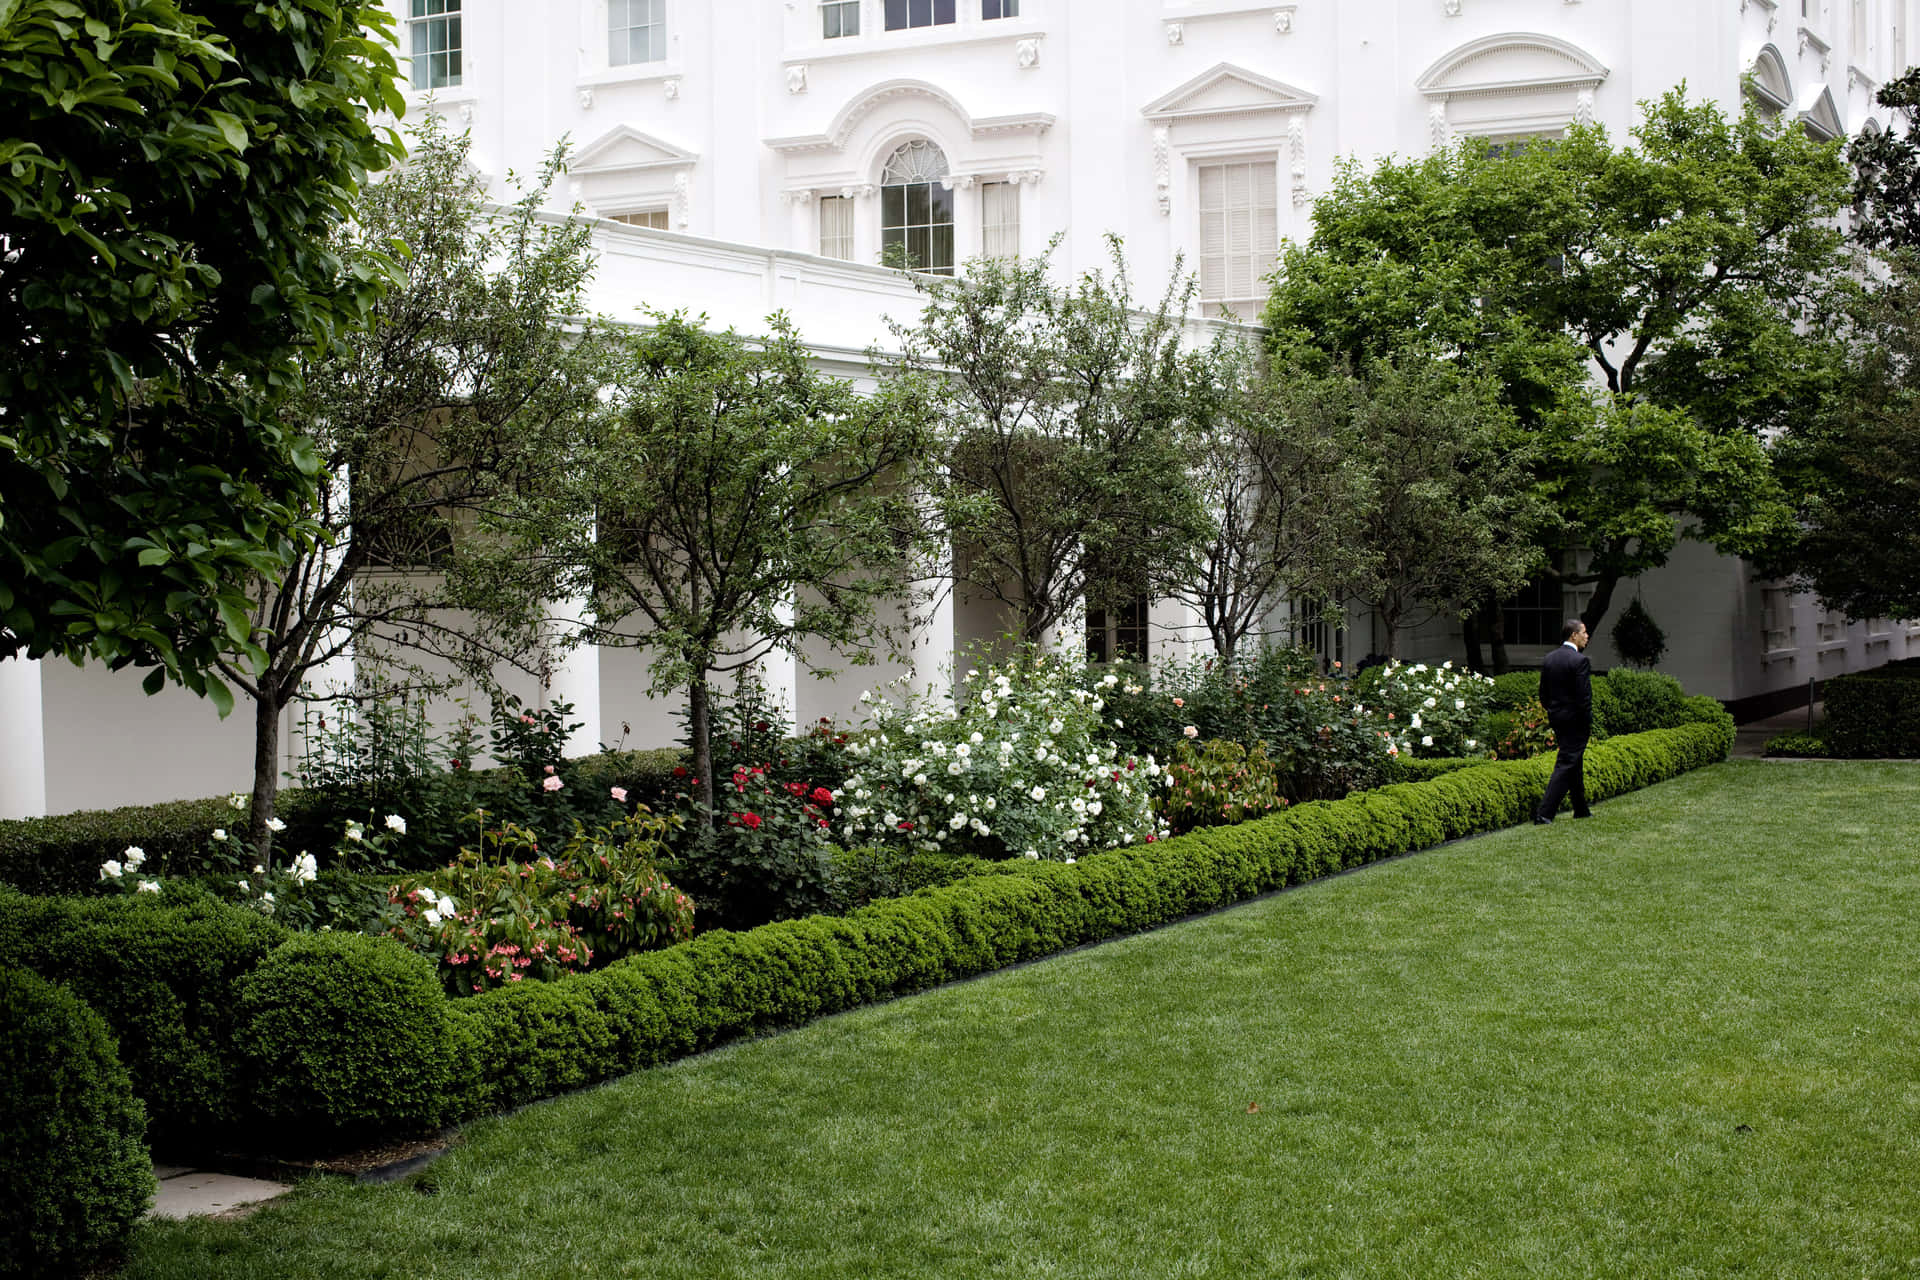 White House With A Lawn